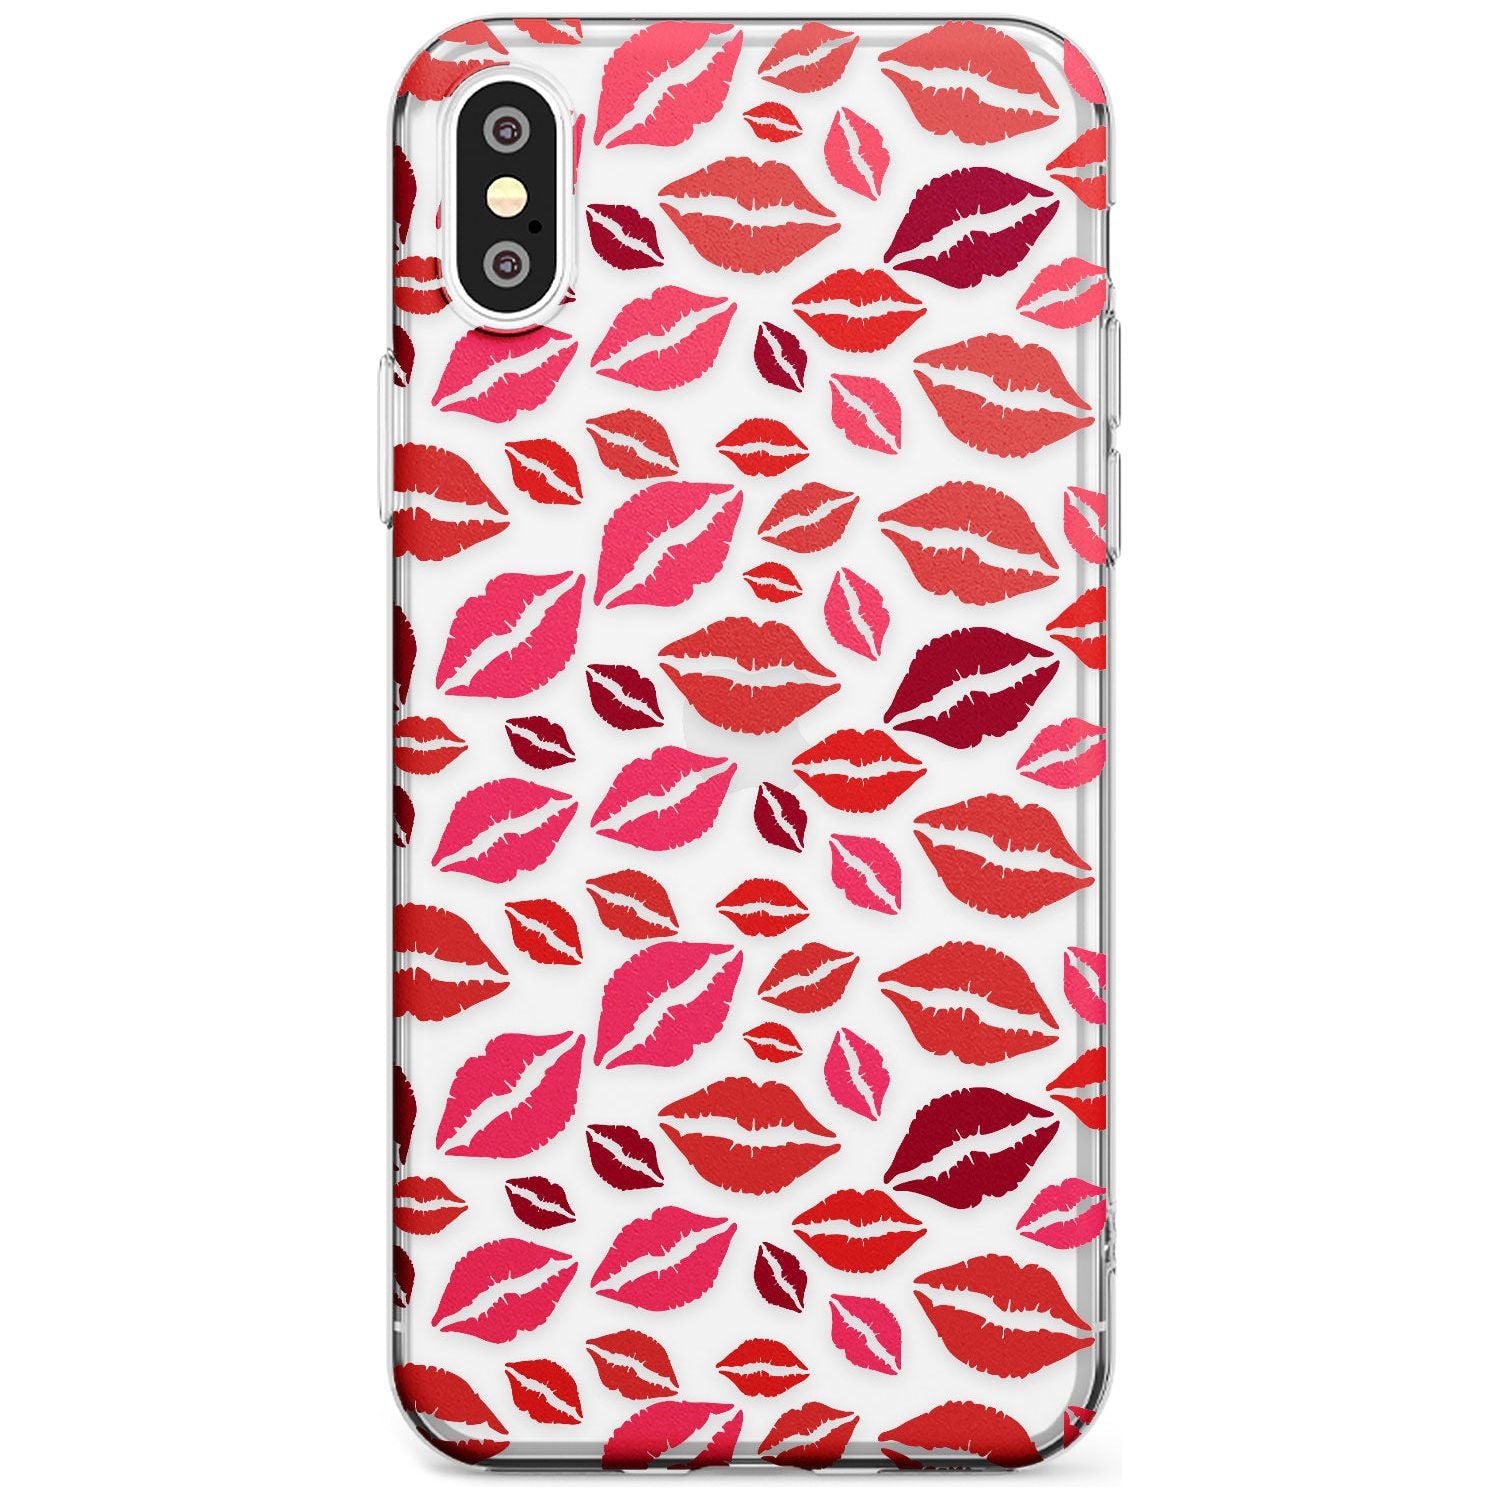 Lips Pattern Black Impact Phone Case for iPhone X XS Max XR